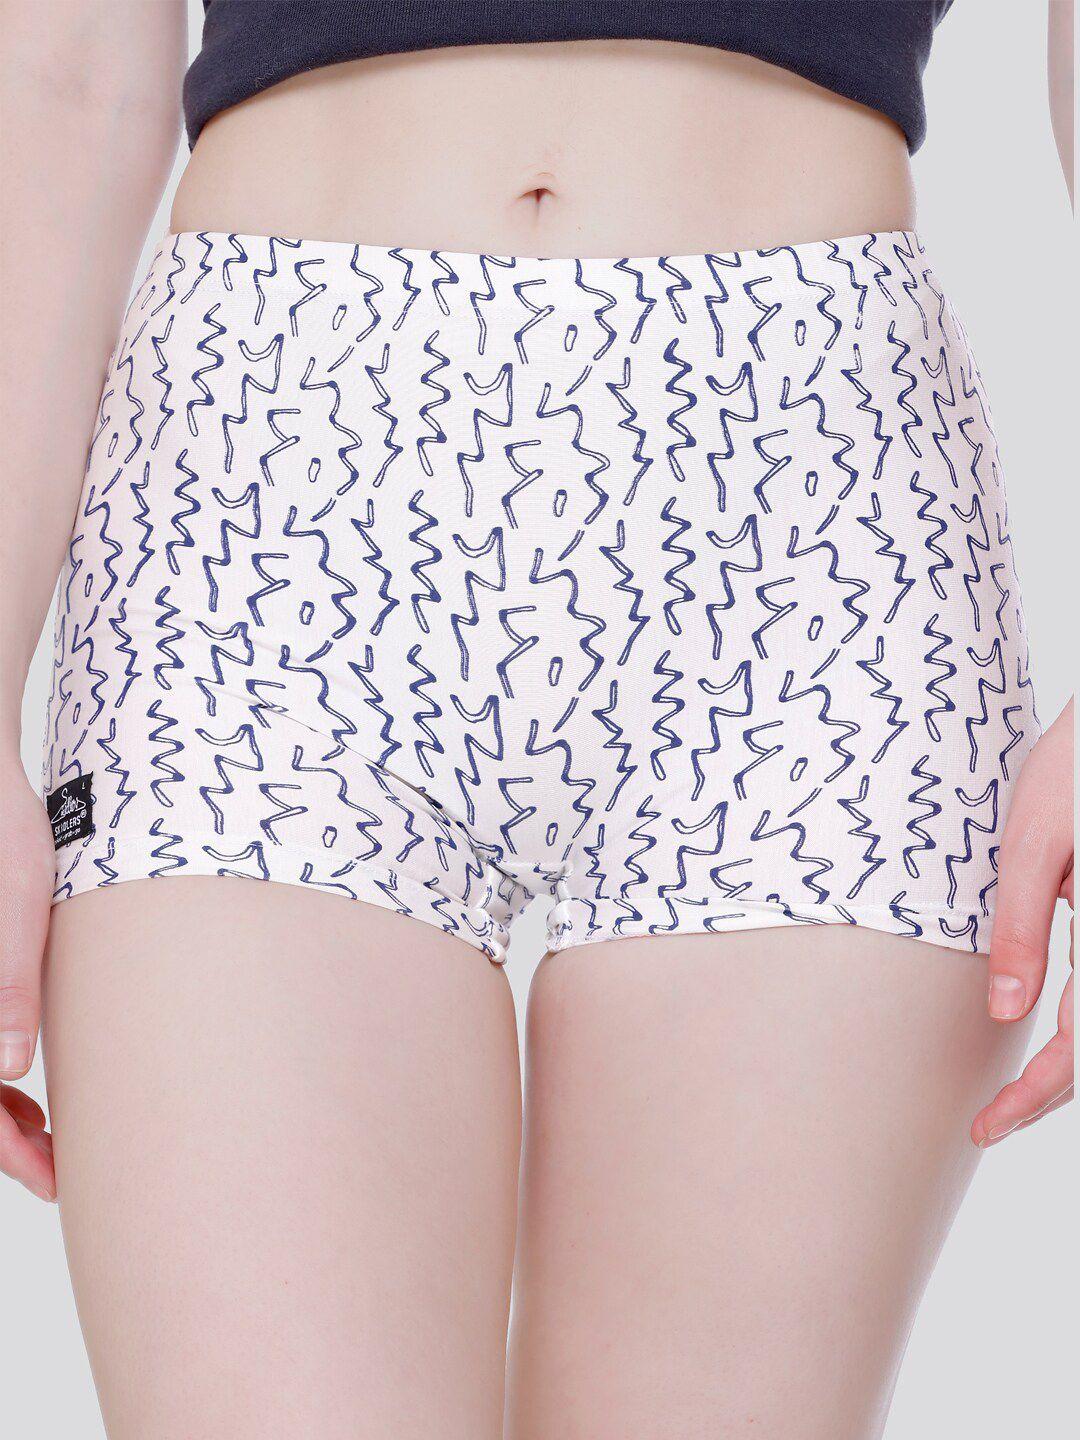 skidlers assorted abstract printed cotton anti-bacterial boy shorts briefs